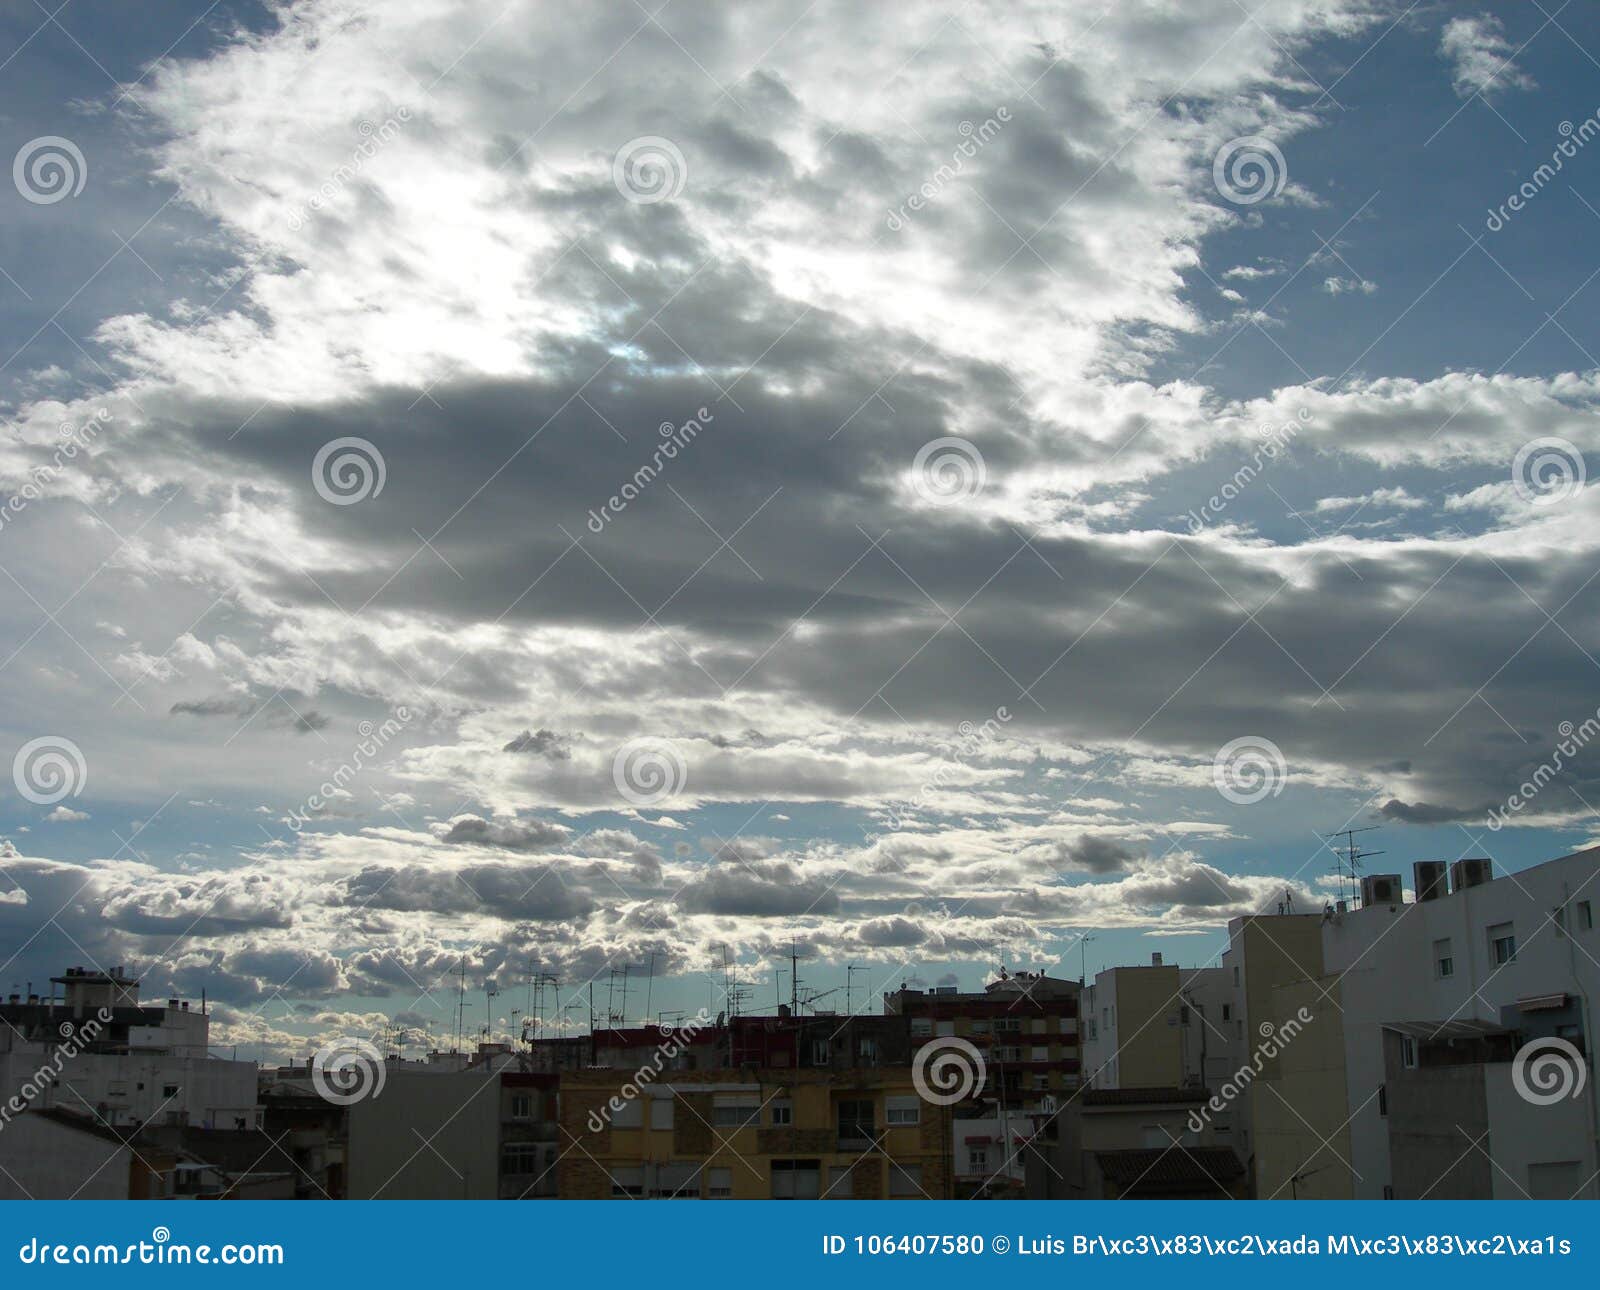 town under a hidden sun and white clouds travelling.evening clouds over the town. ciudad cubierta de nubes